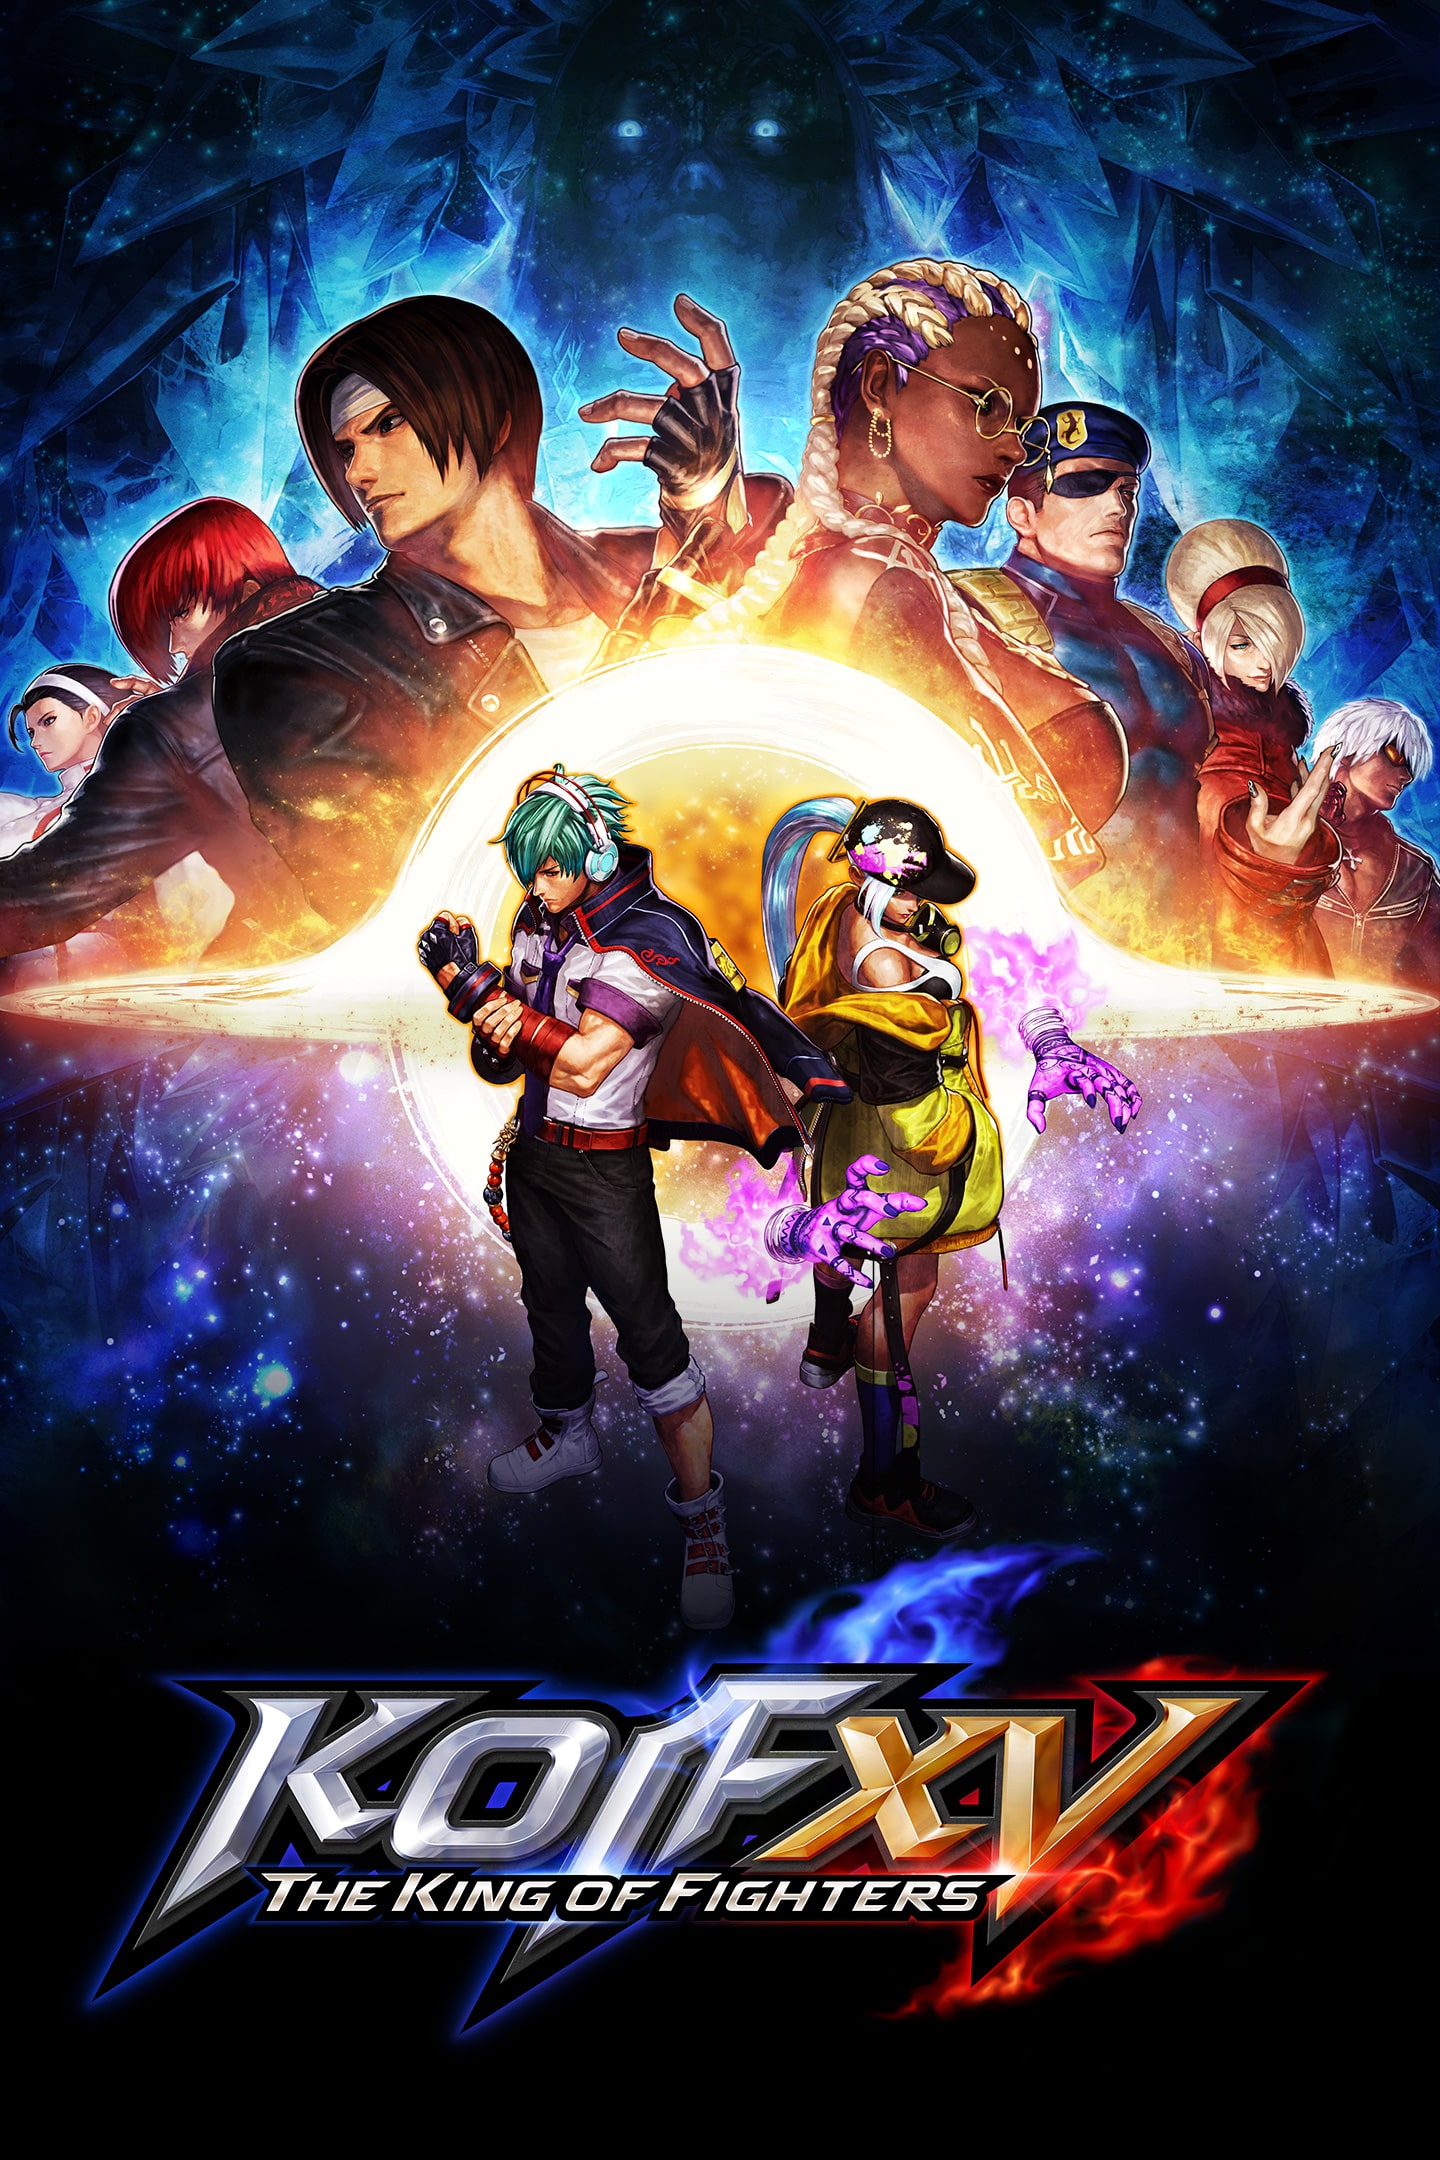  The King of Fighters XV - PlayStation 4 : Plaion Inc